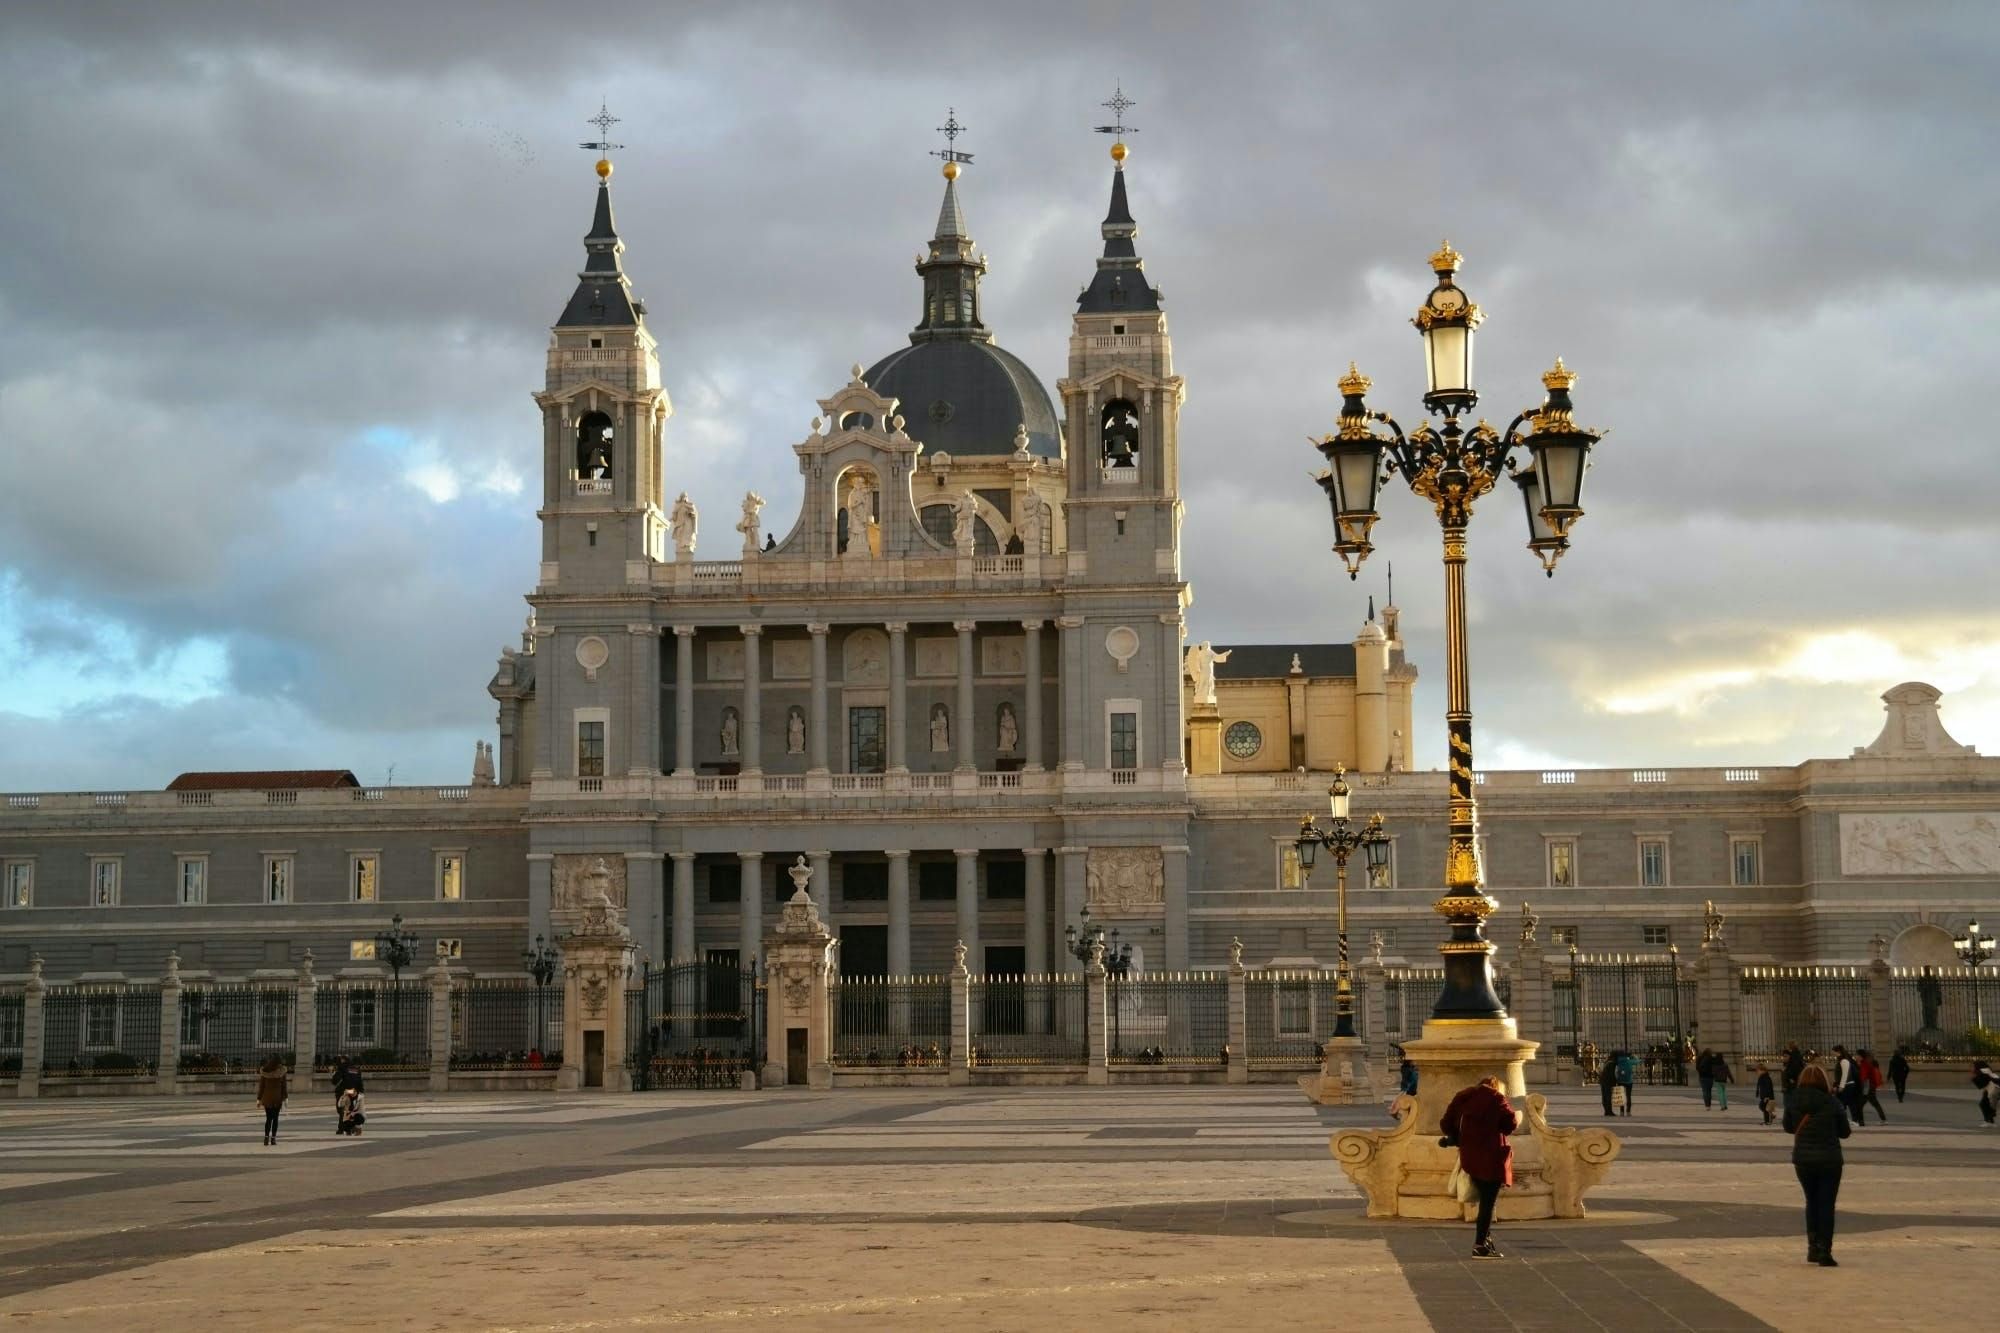 Guided tour with access to the Royal Palace and the Almudena Cathedral